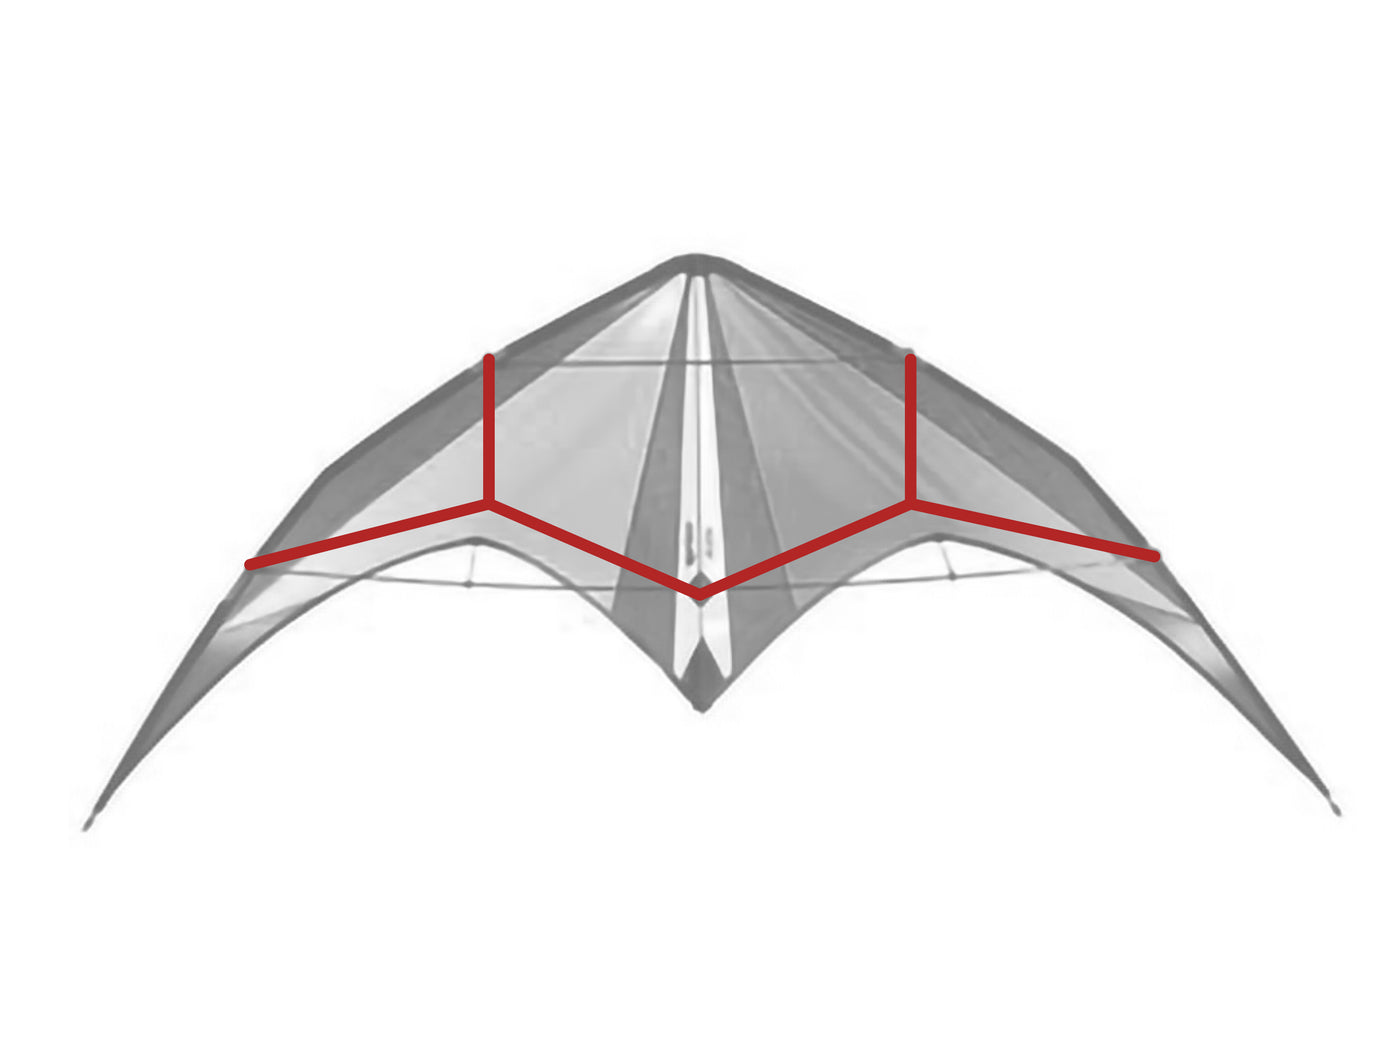 Diagram showing location of the Alien Bridle on the kite.